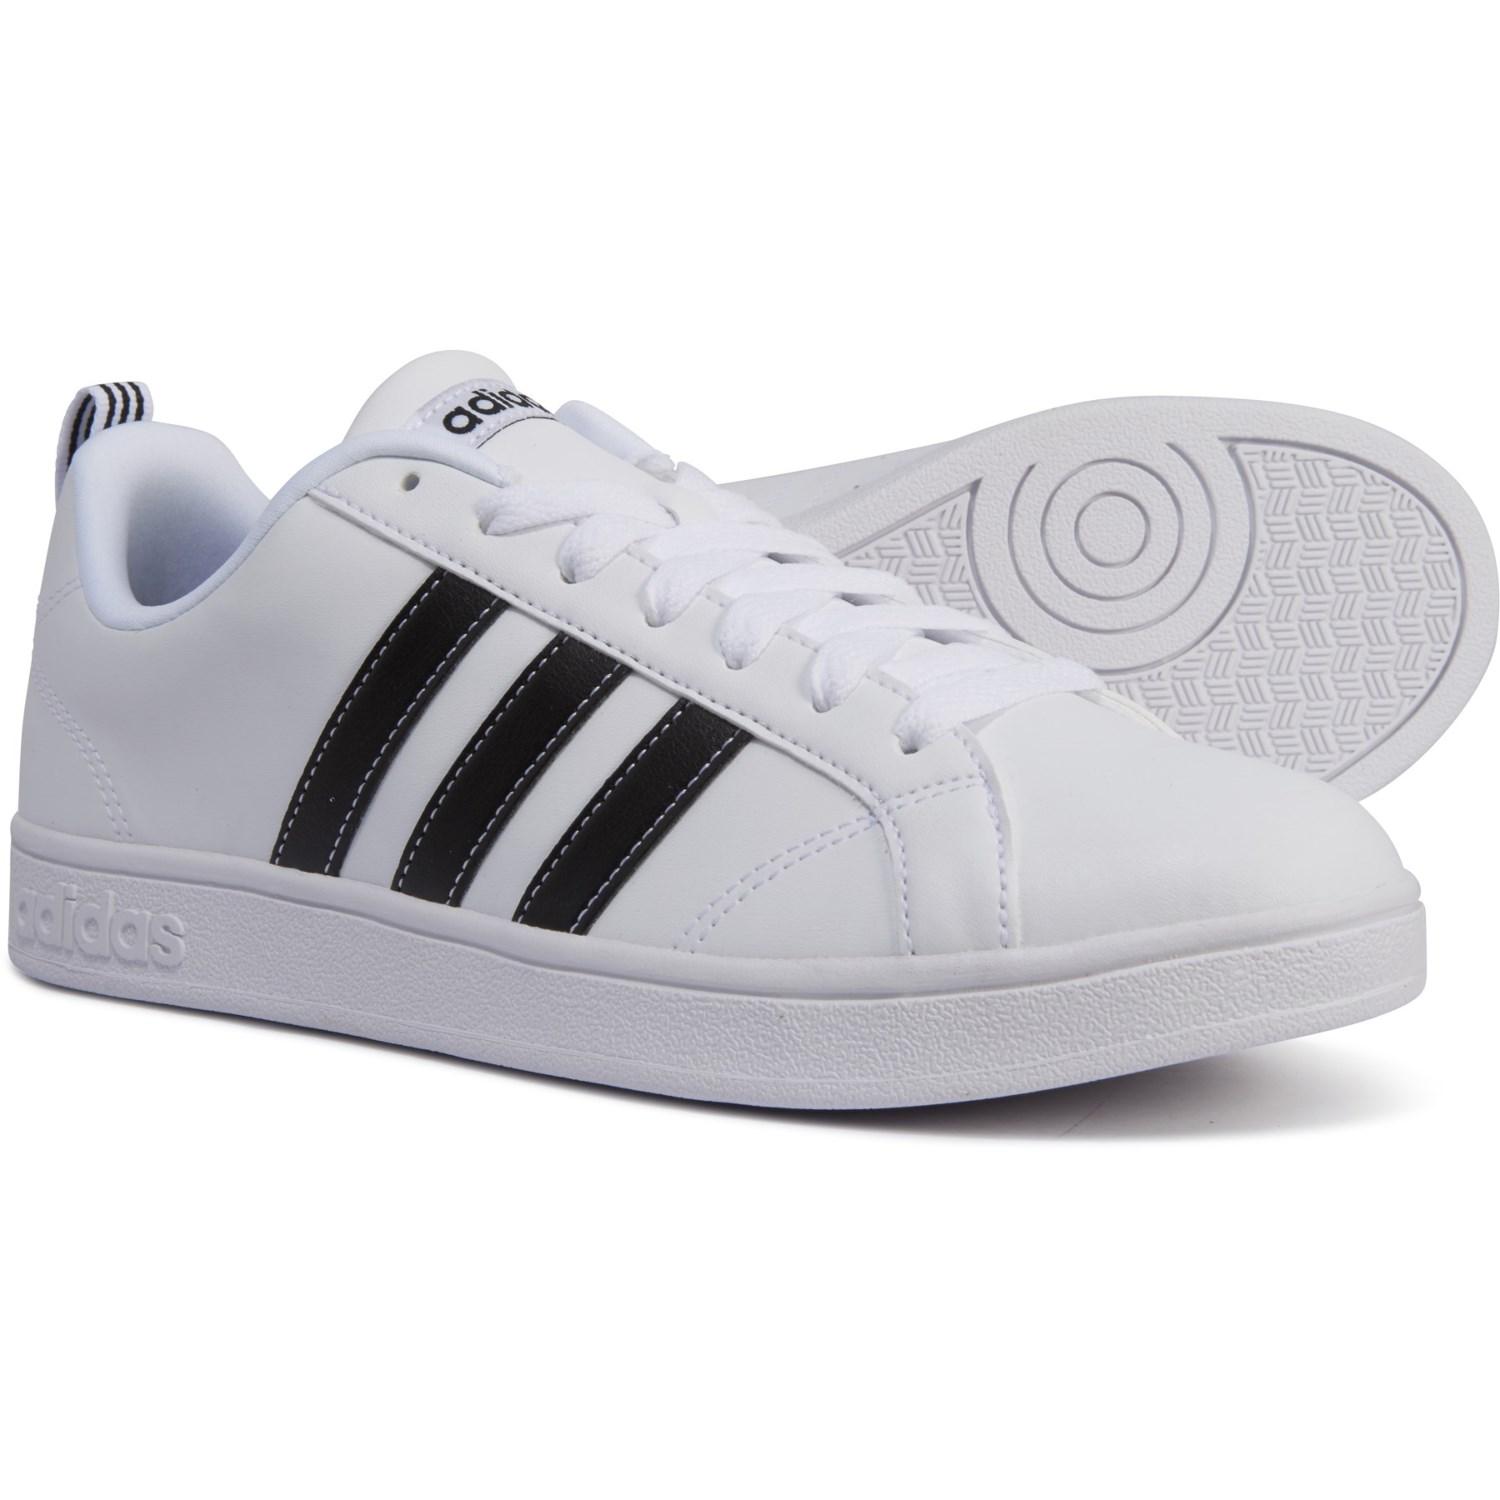 adidas Rubber Neo Cloudfoam(r) Vs Advantage Shoes in White - Lyst